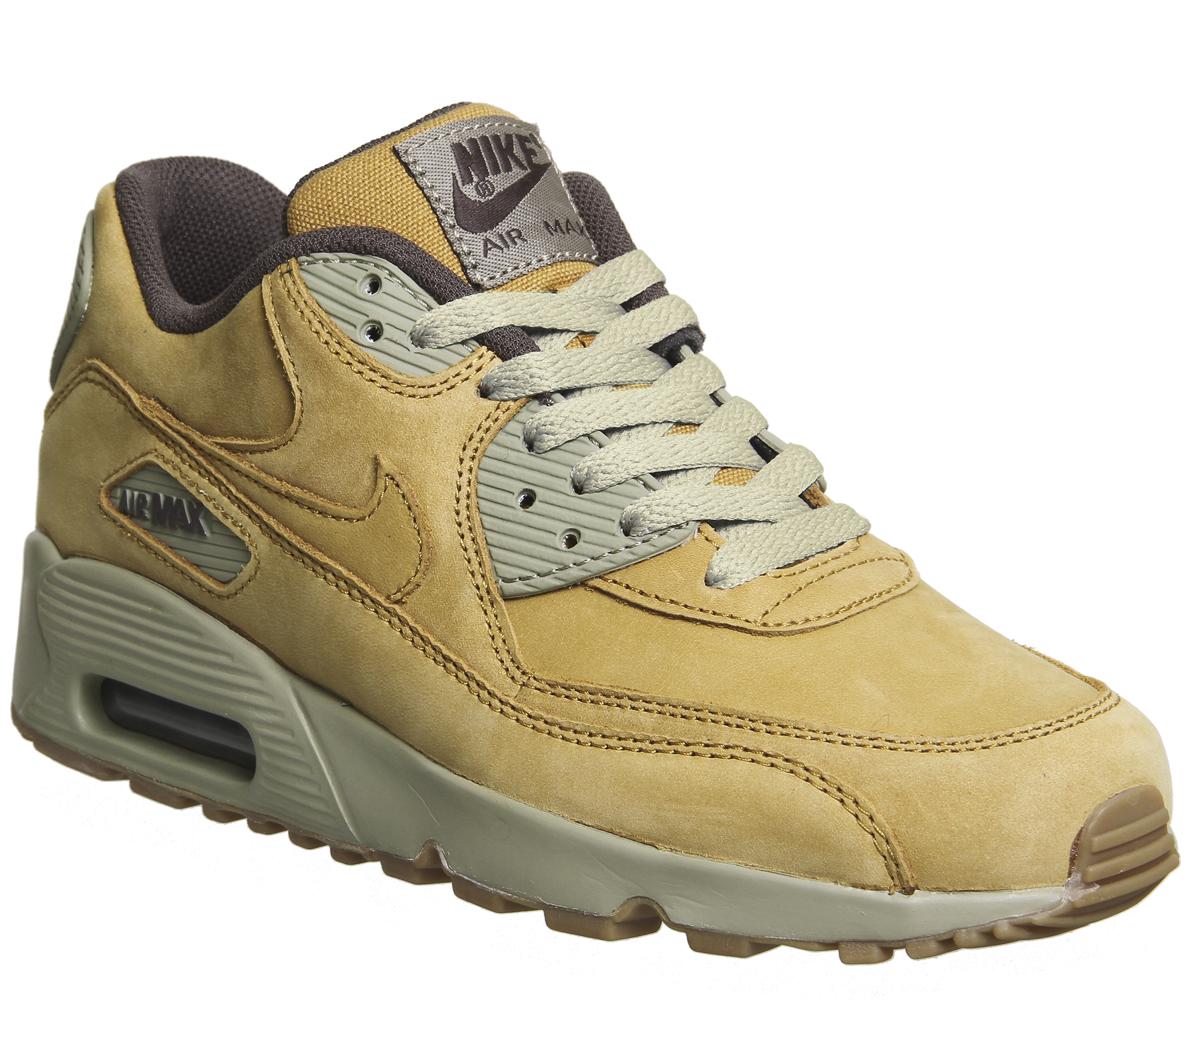 Nike Air Max 90 Trainers Flax Flax Gum Light Brown - Hers trainers